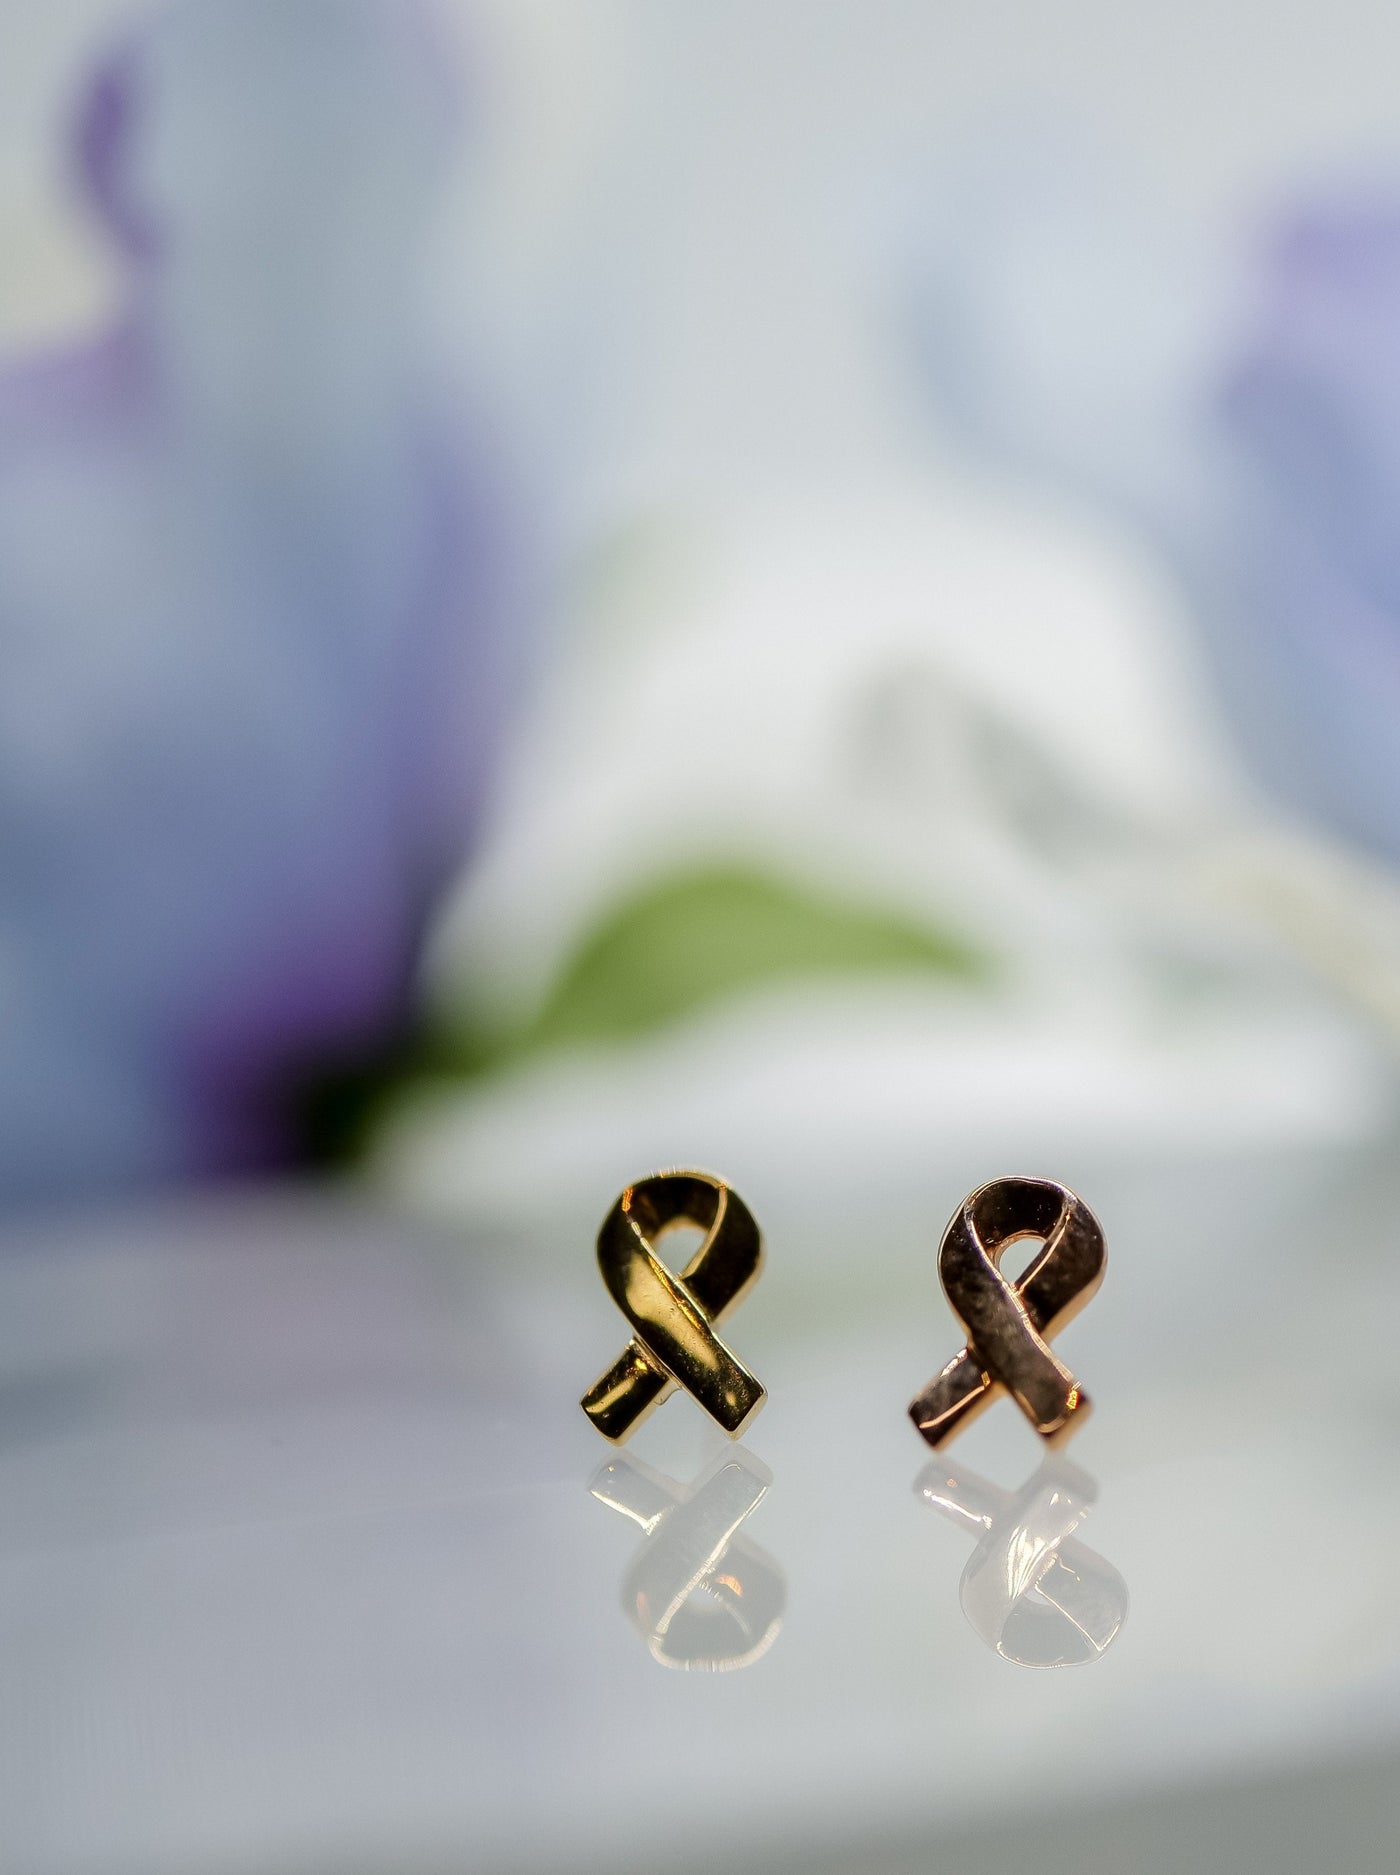 cancer ribbons in yellow and rose gold threadless end